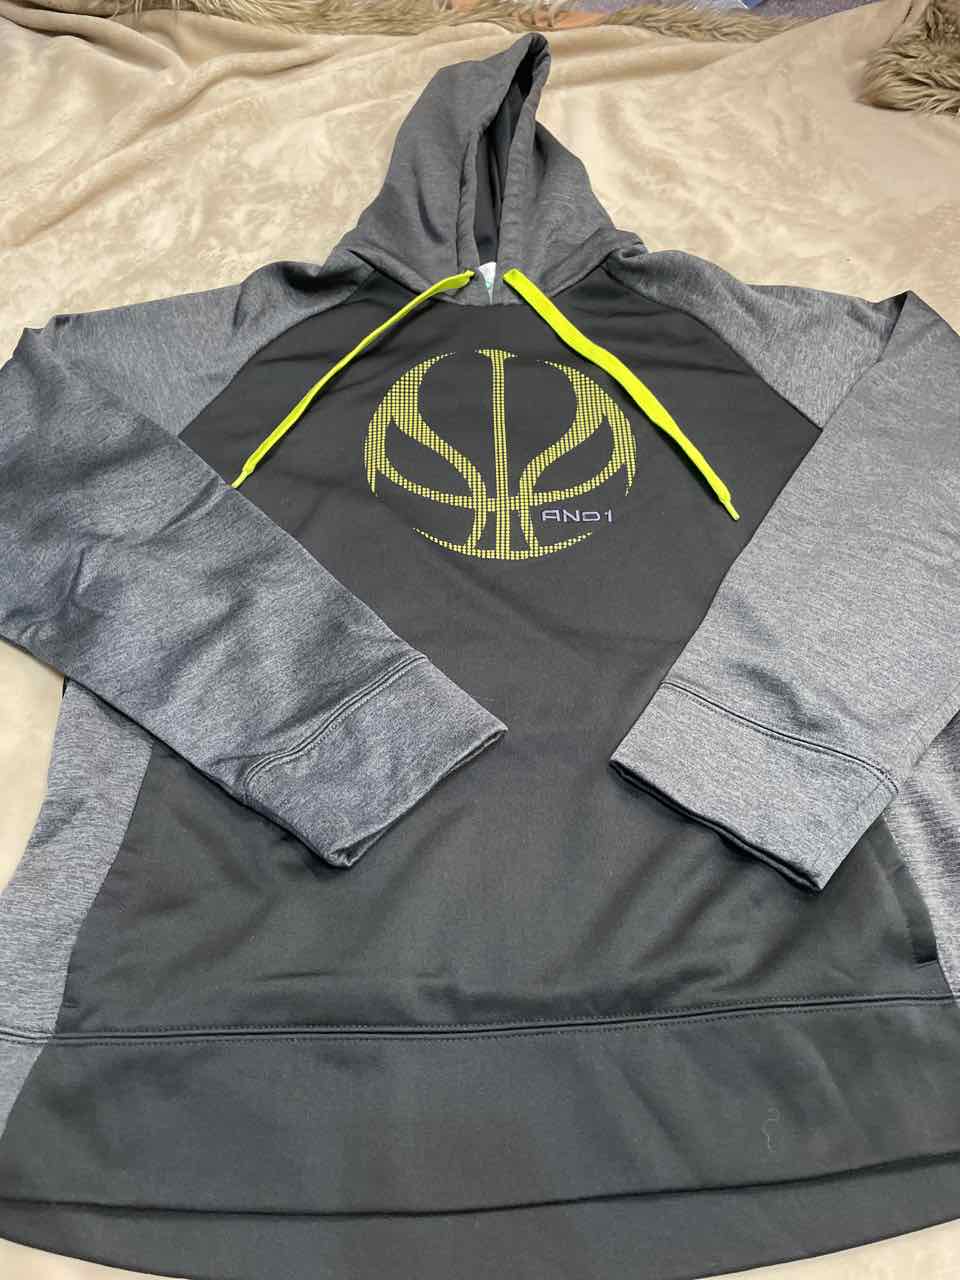 L - And 1 Hoodie